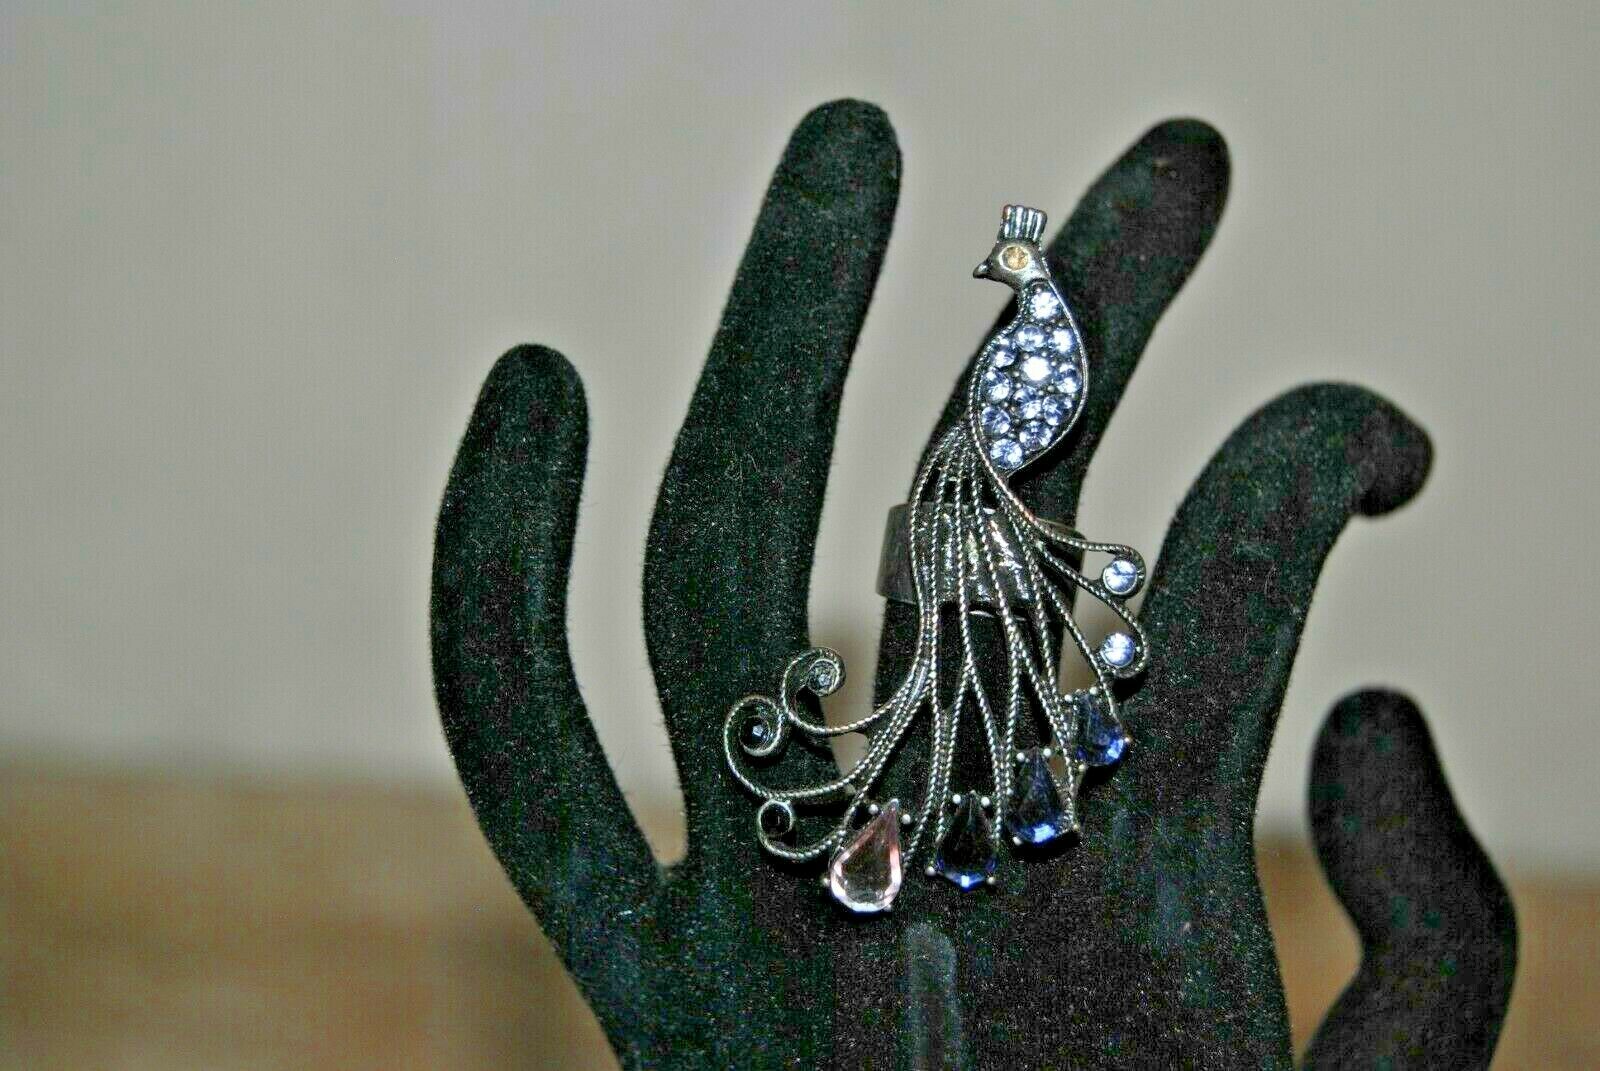 Antique / Vintage Silver Tone Long Ring Peacock With Rhinestones Size 6